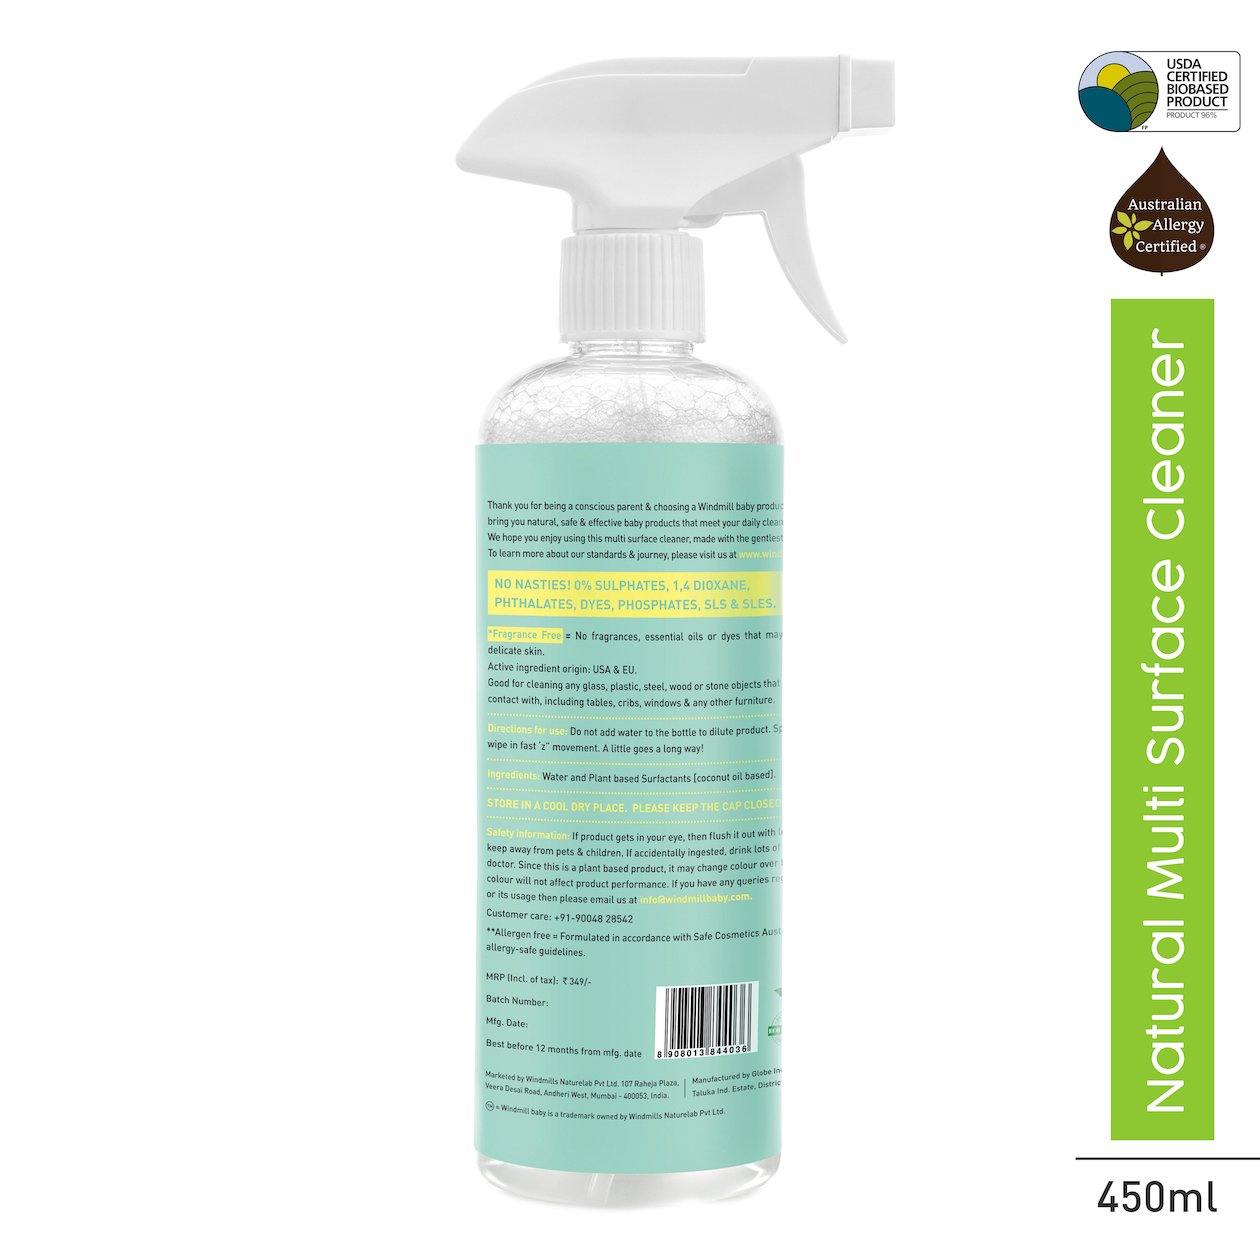 Natural Multi Surface Cleaner - Windmill Baby